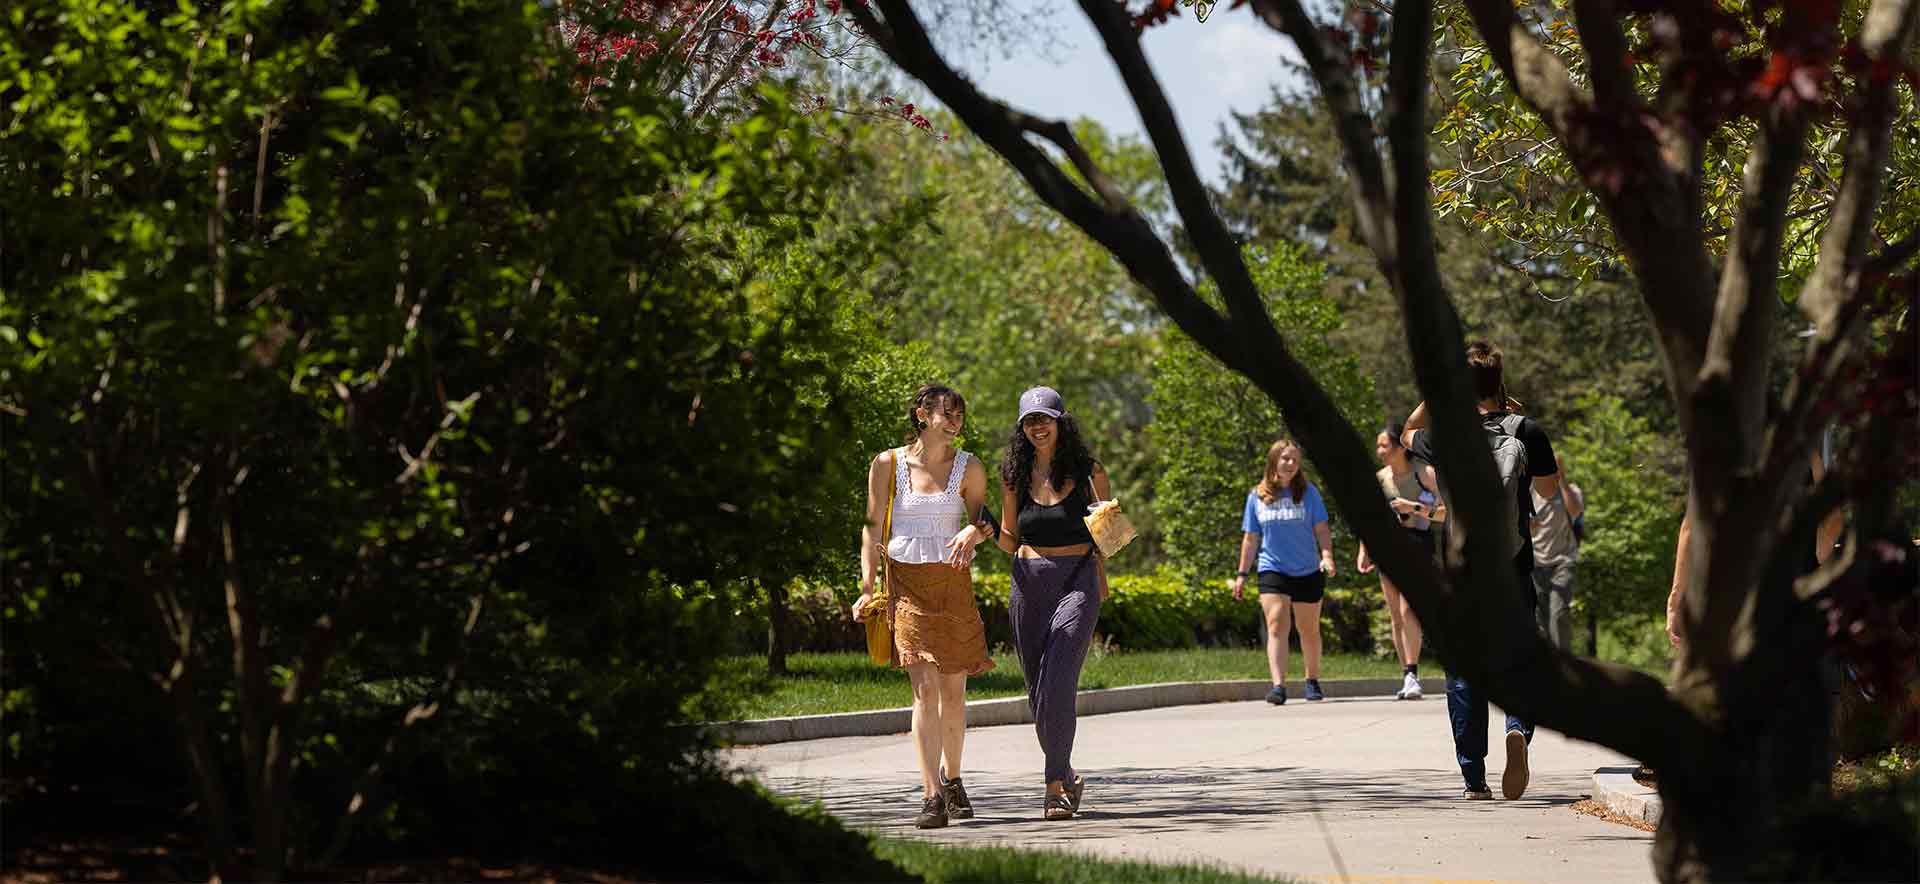 Students walking on campus with trees in the foreground